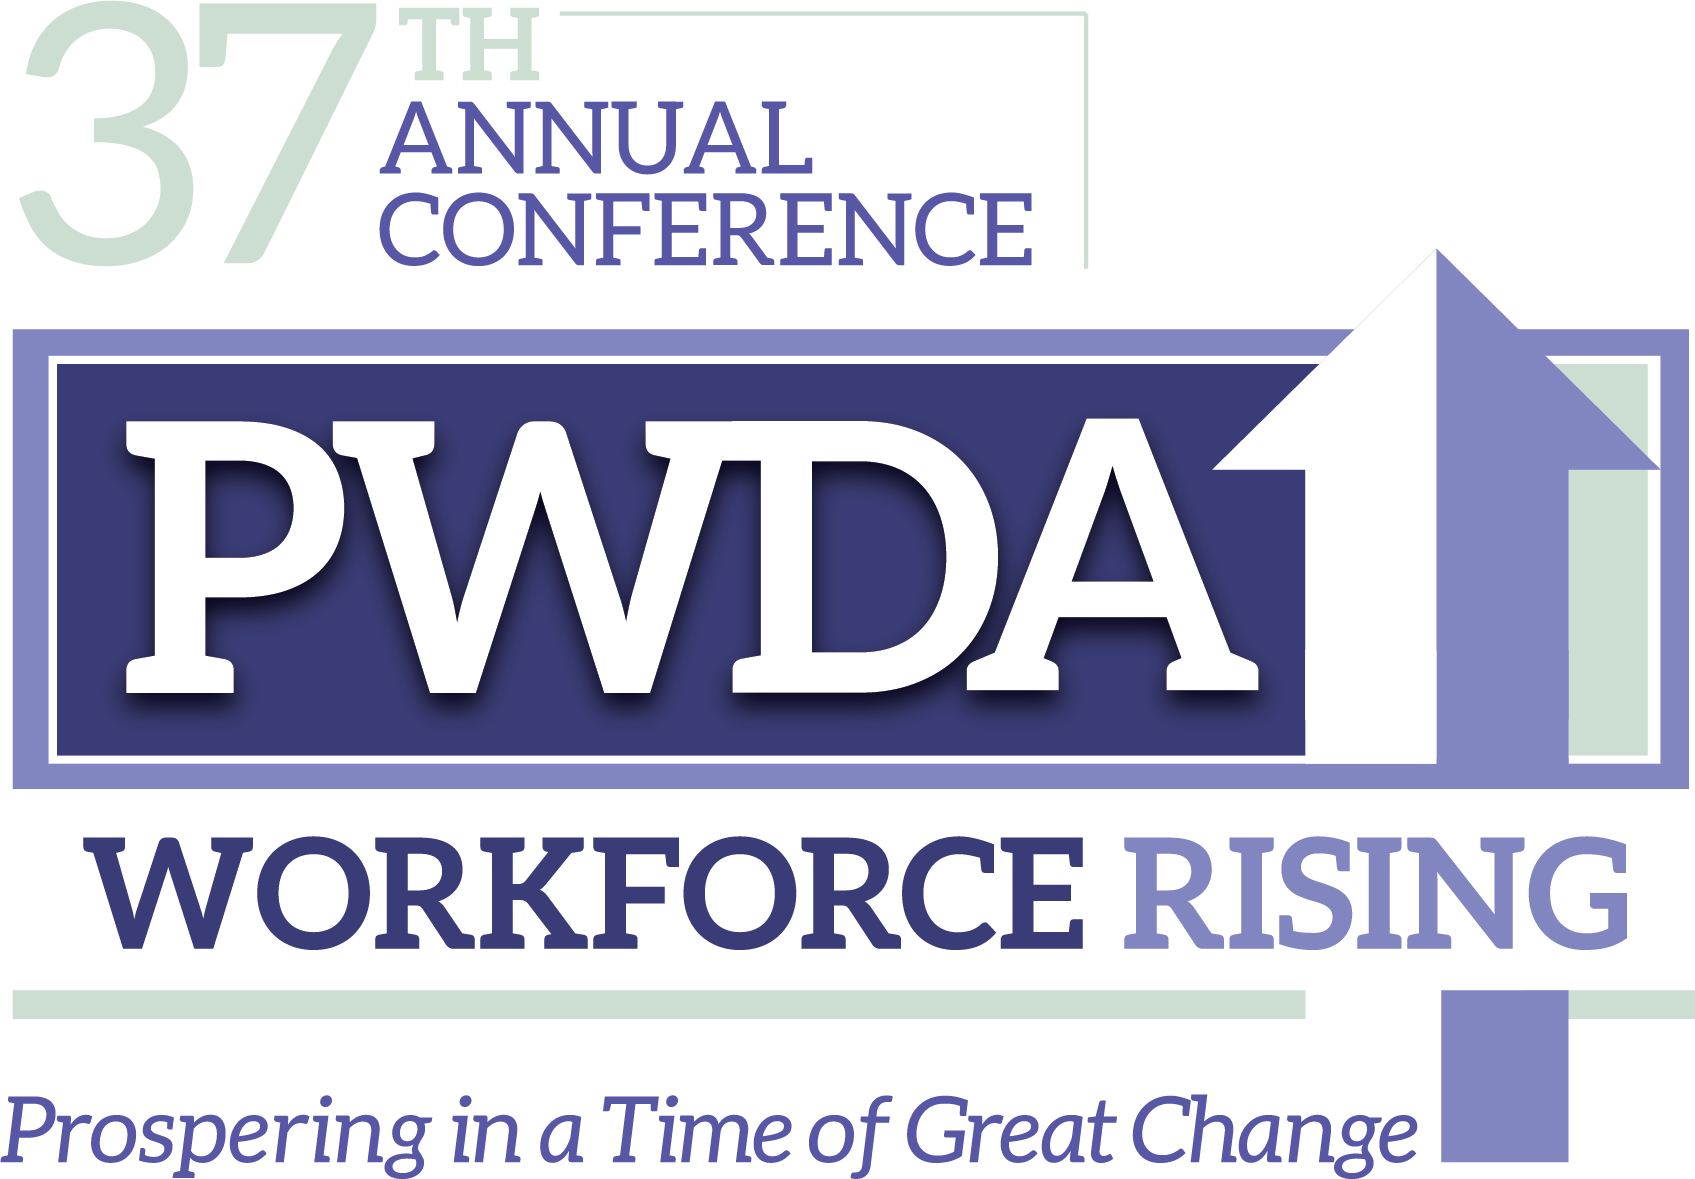 PWDA Conference